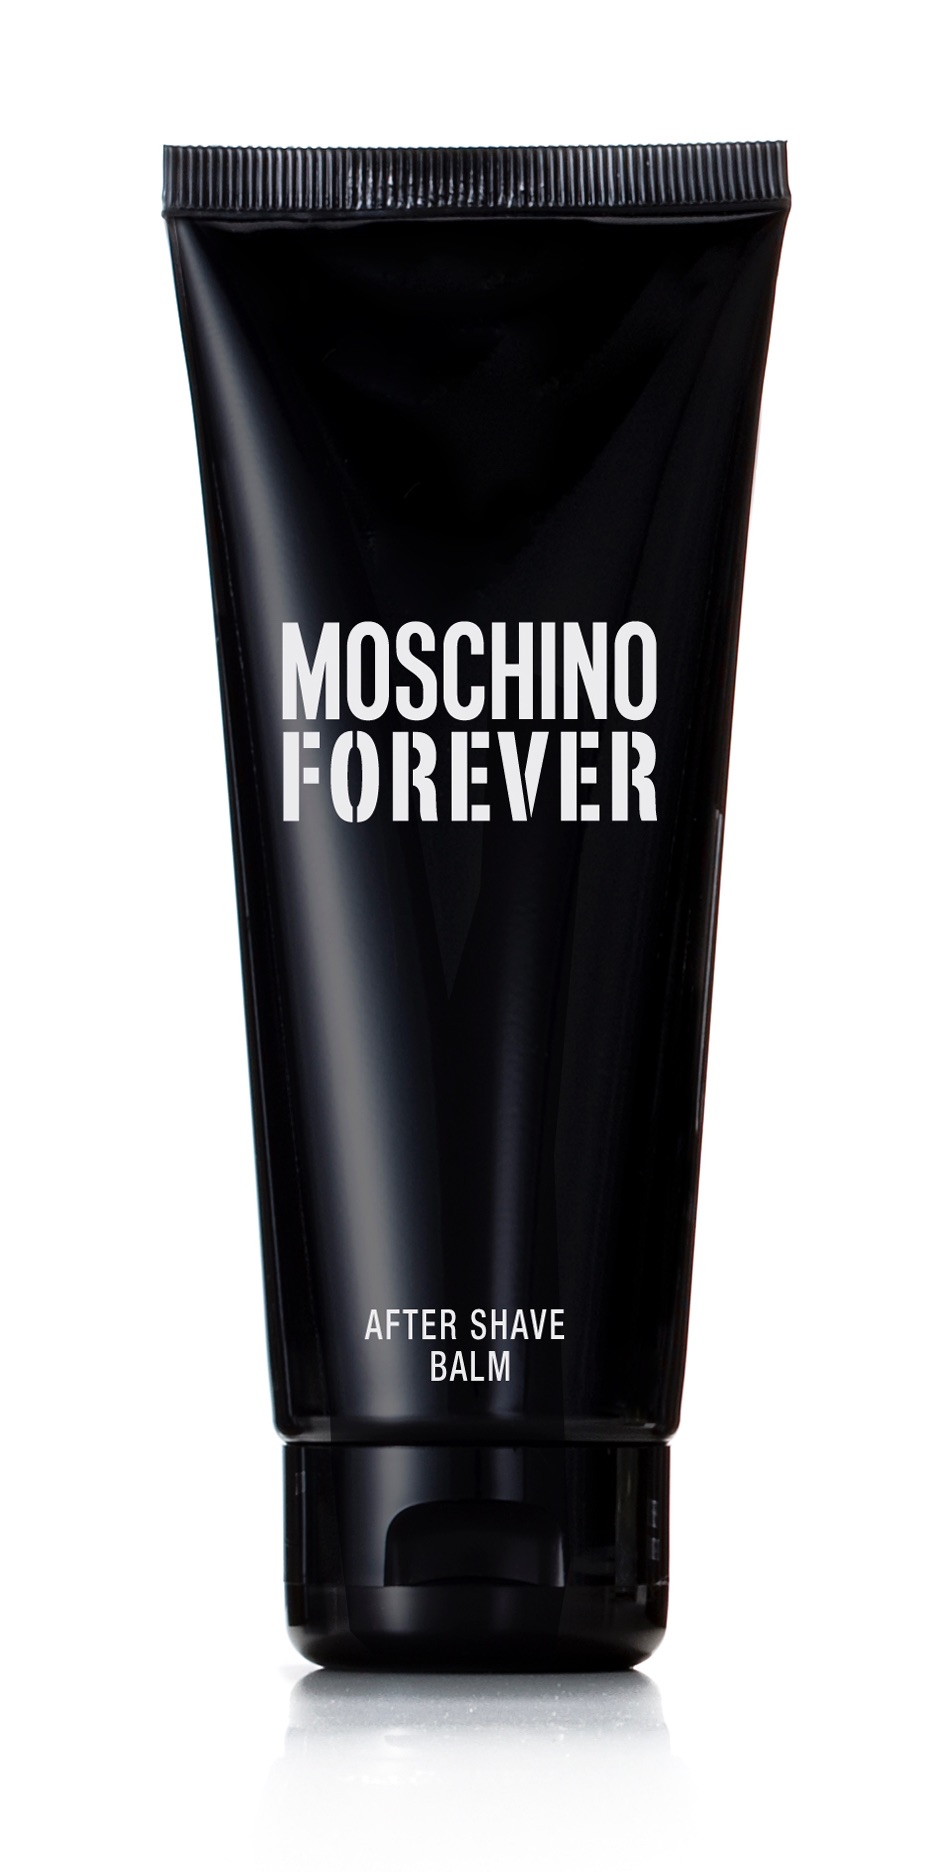 Moschino Forever After Shave Balm 100ml